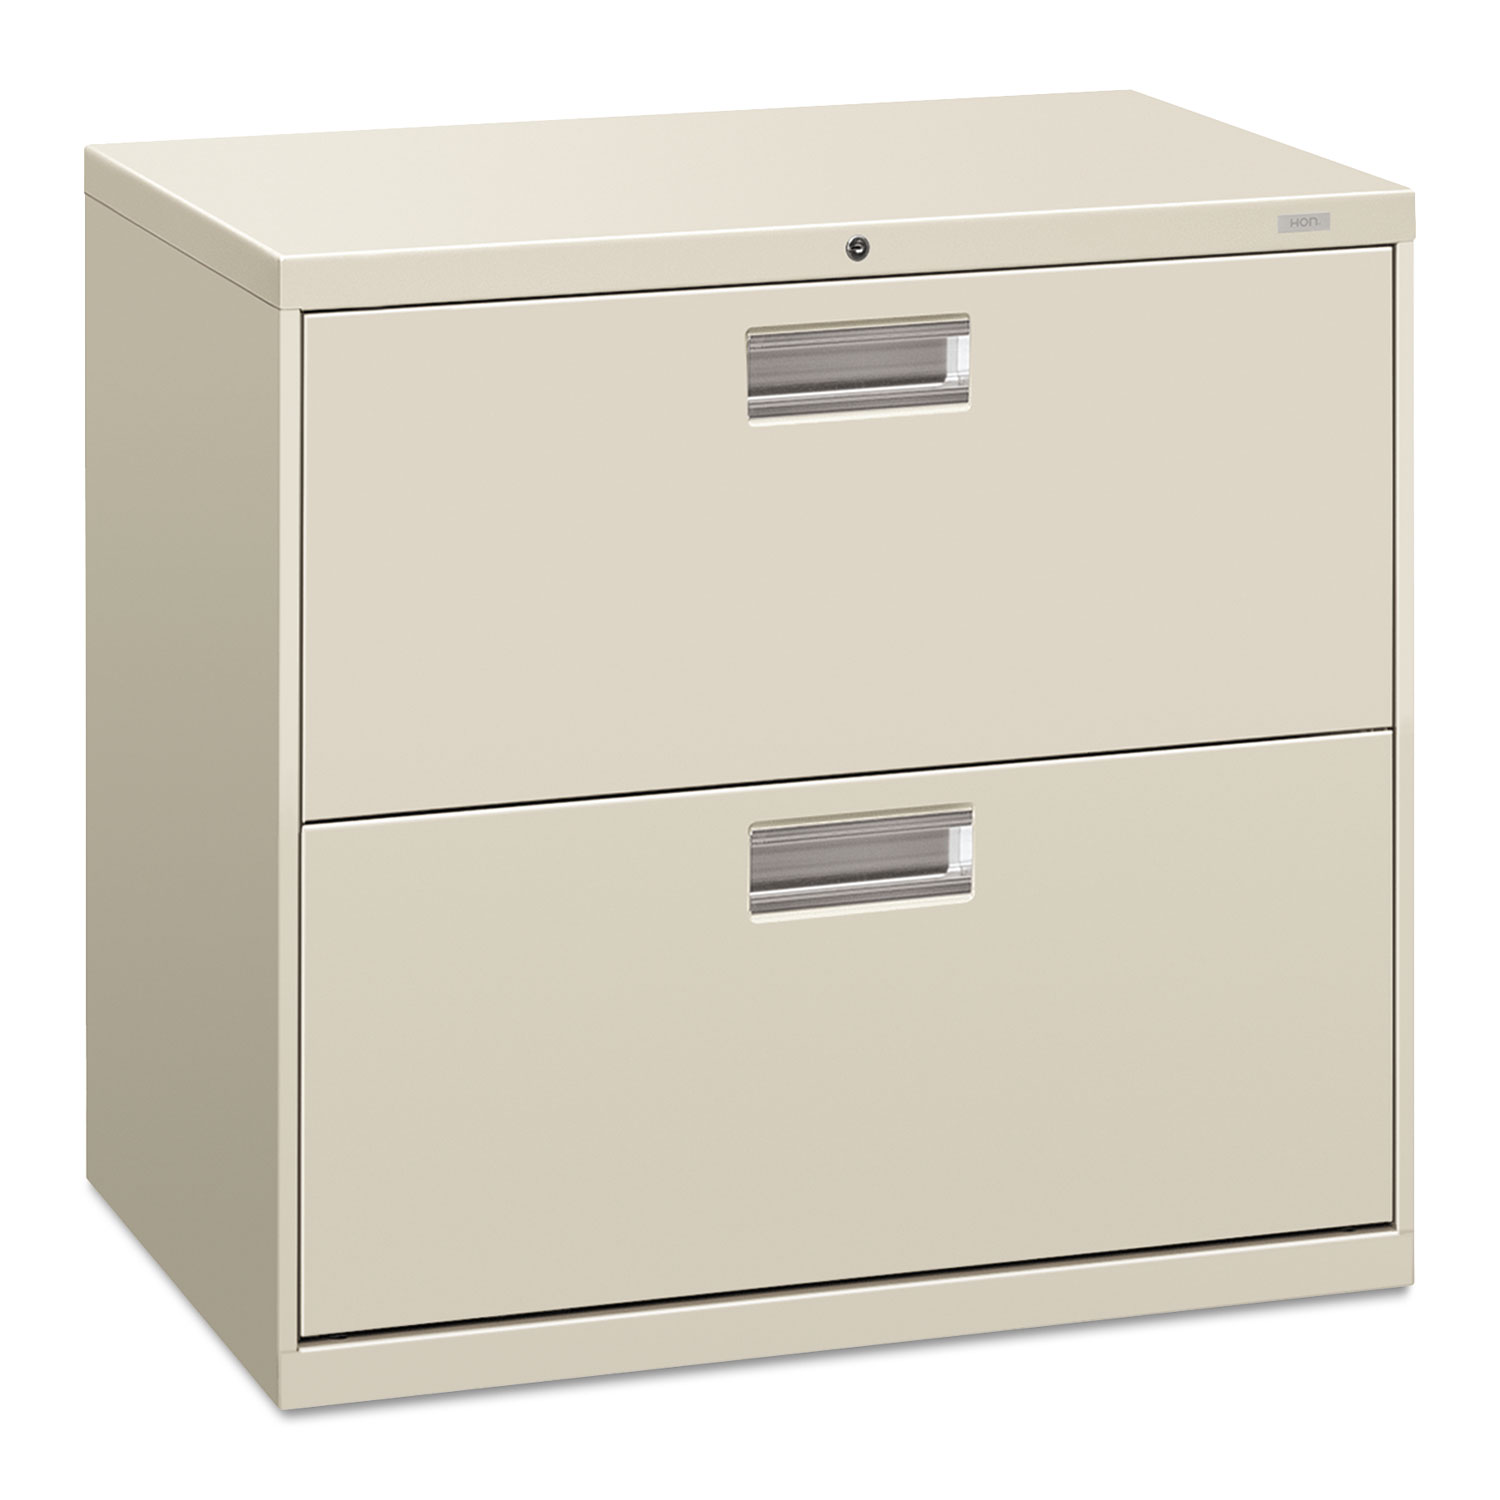 HON 600 Series Two-Drawer Lateral File, 30w x 19-1/4d, Light Gray